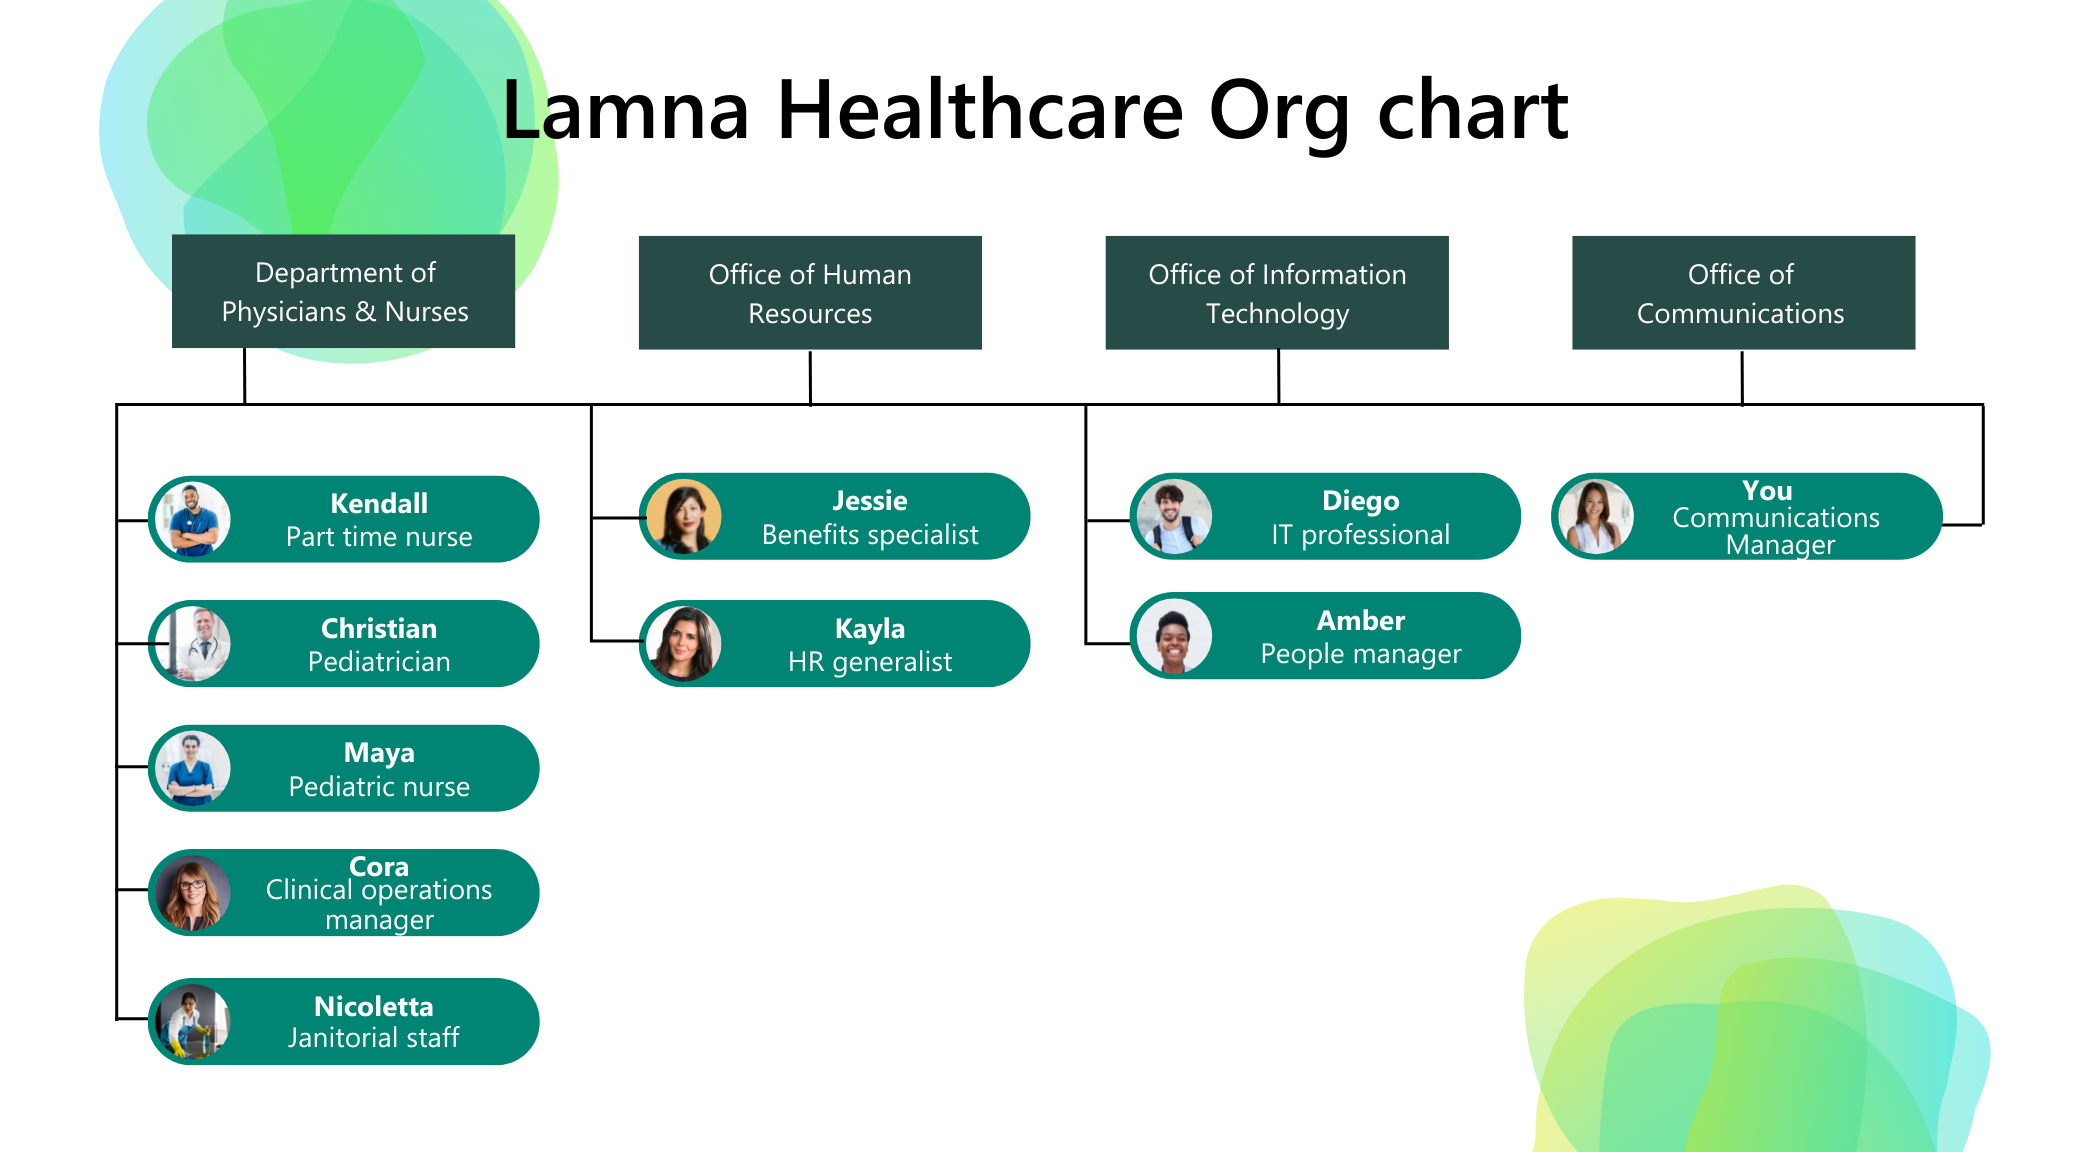 Diagram of a simplified Lamna healthcare org chart.